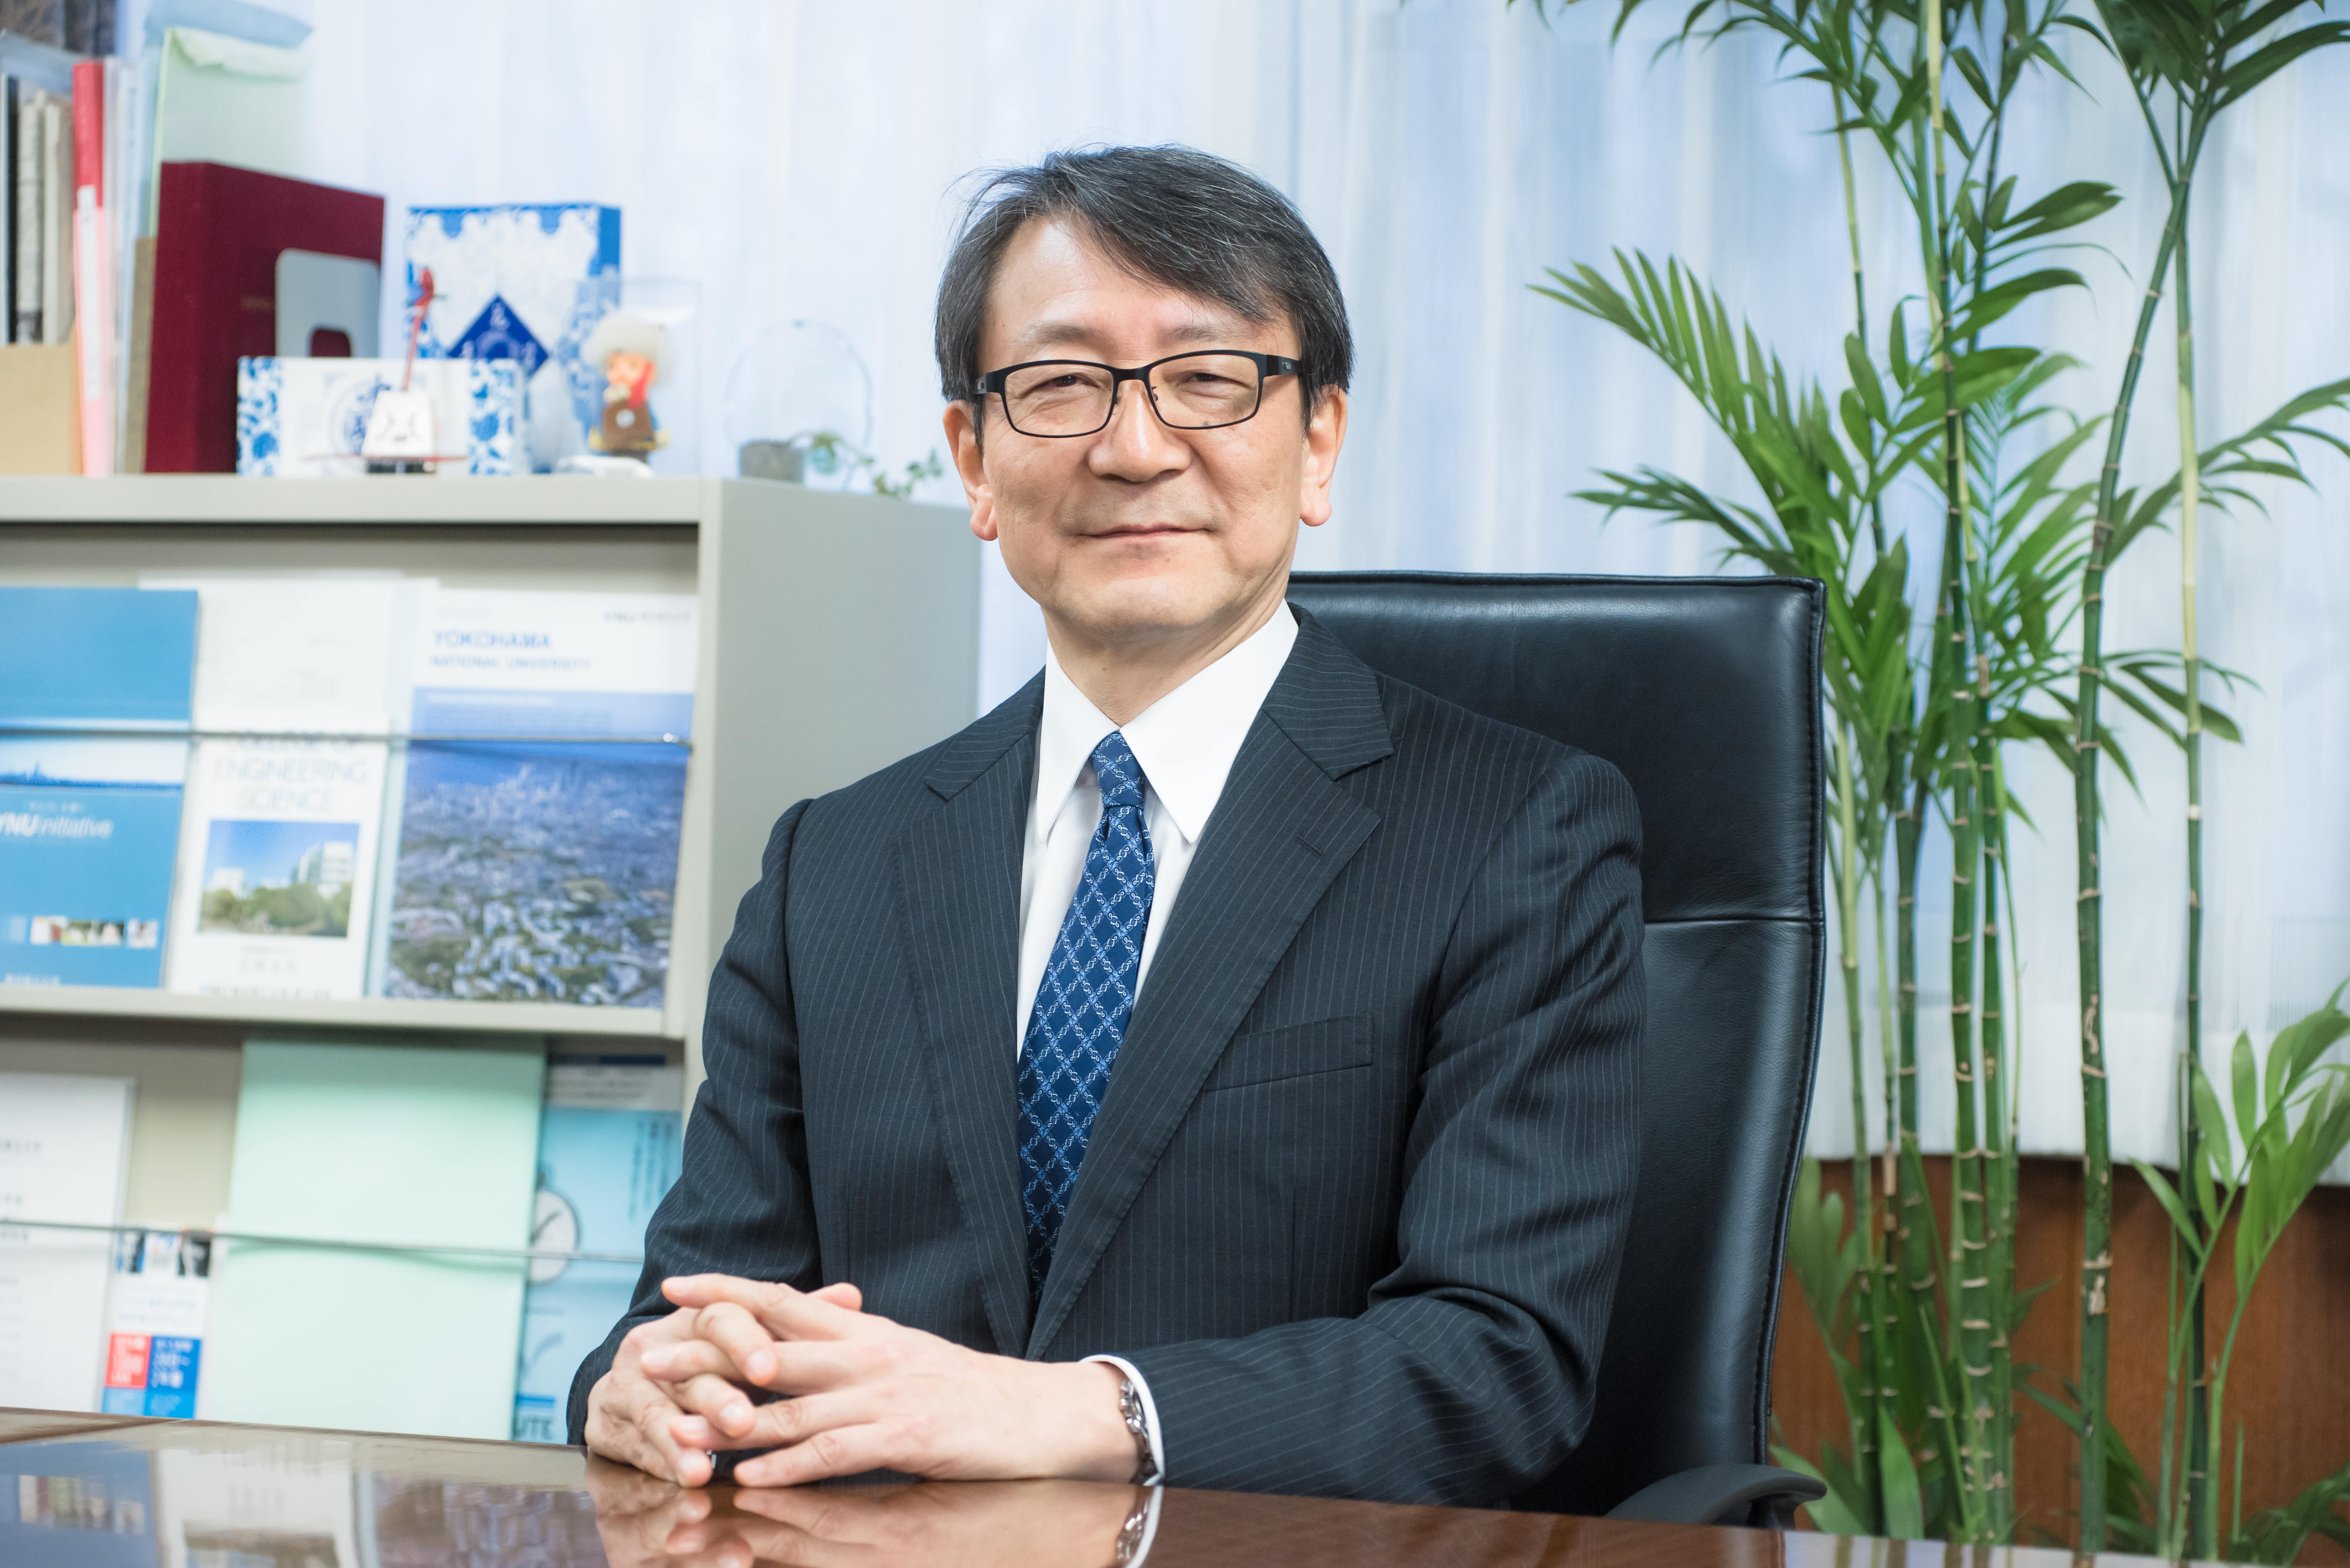 Masayoshi Watanabe, Director of the Advanced Chemical Energy Research Center